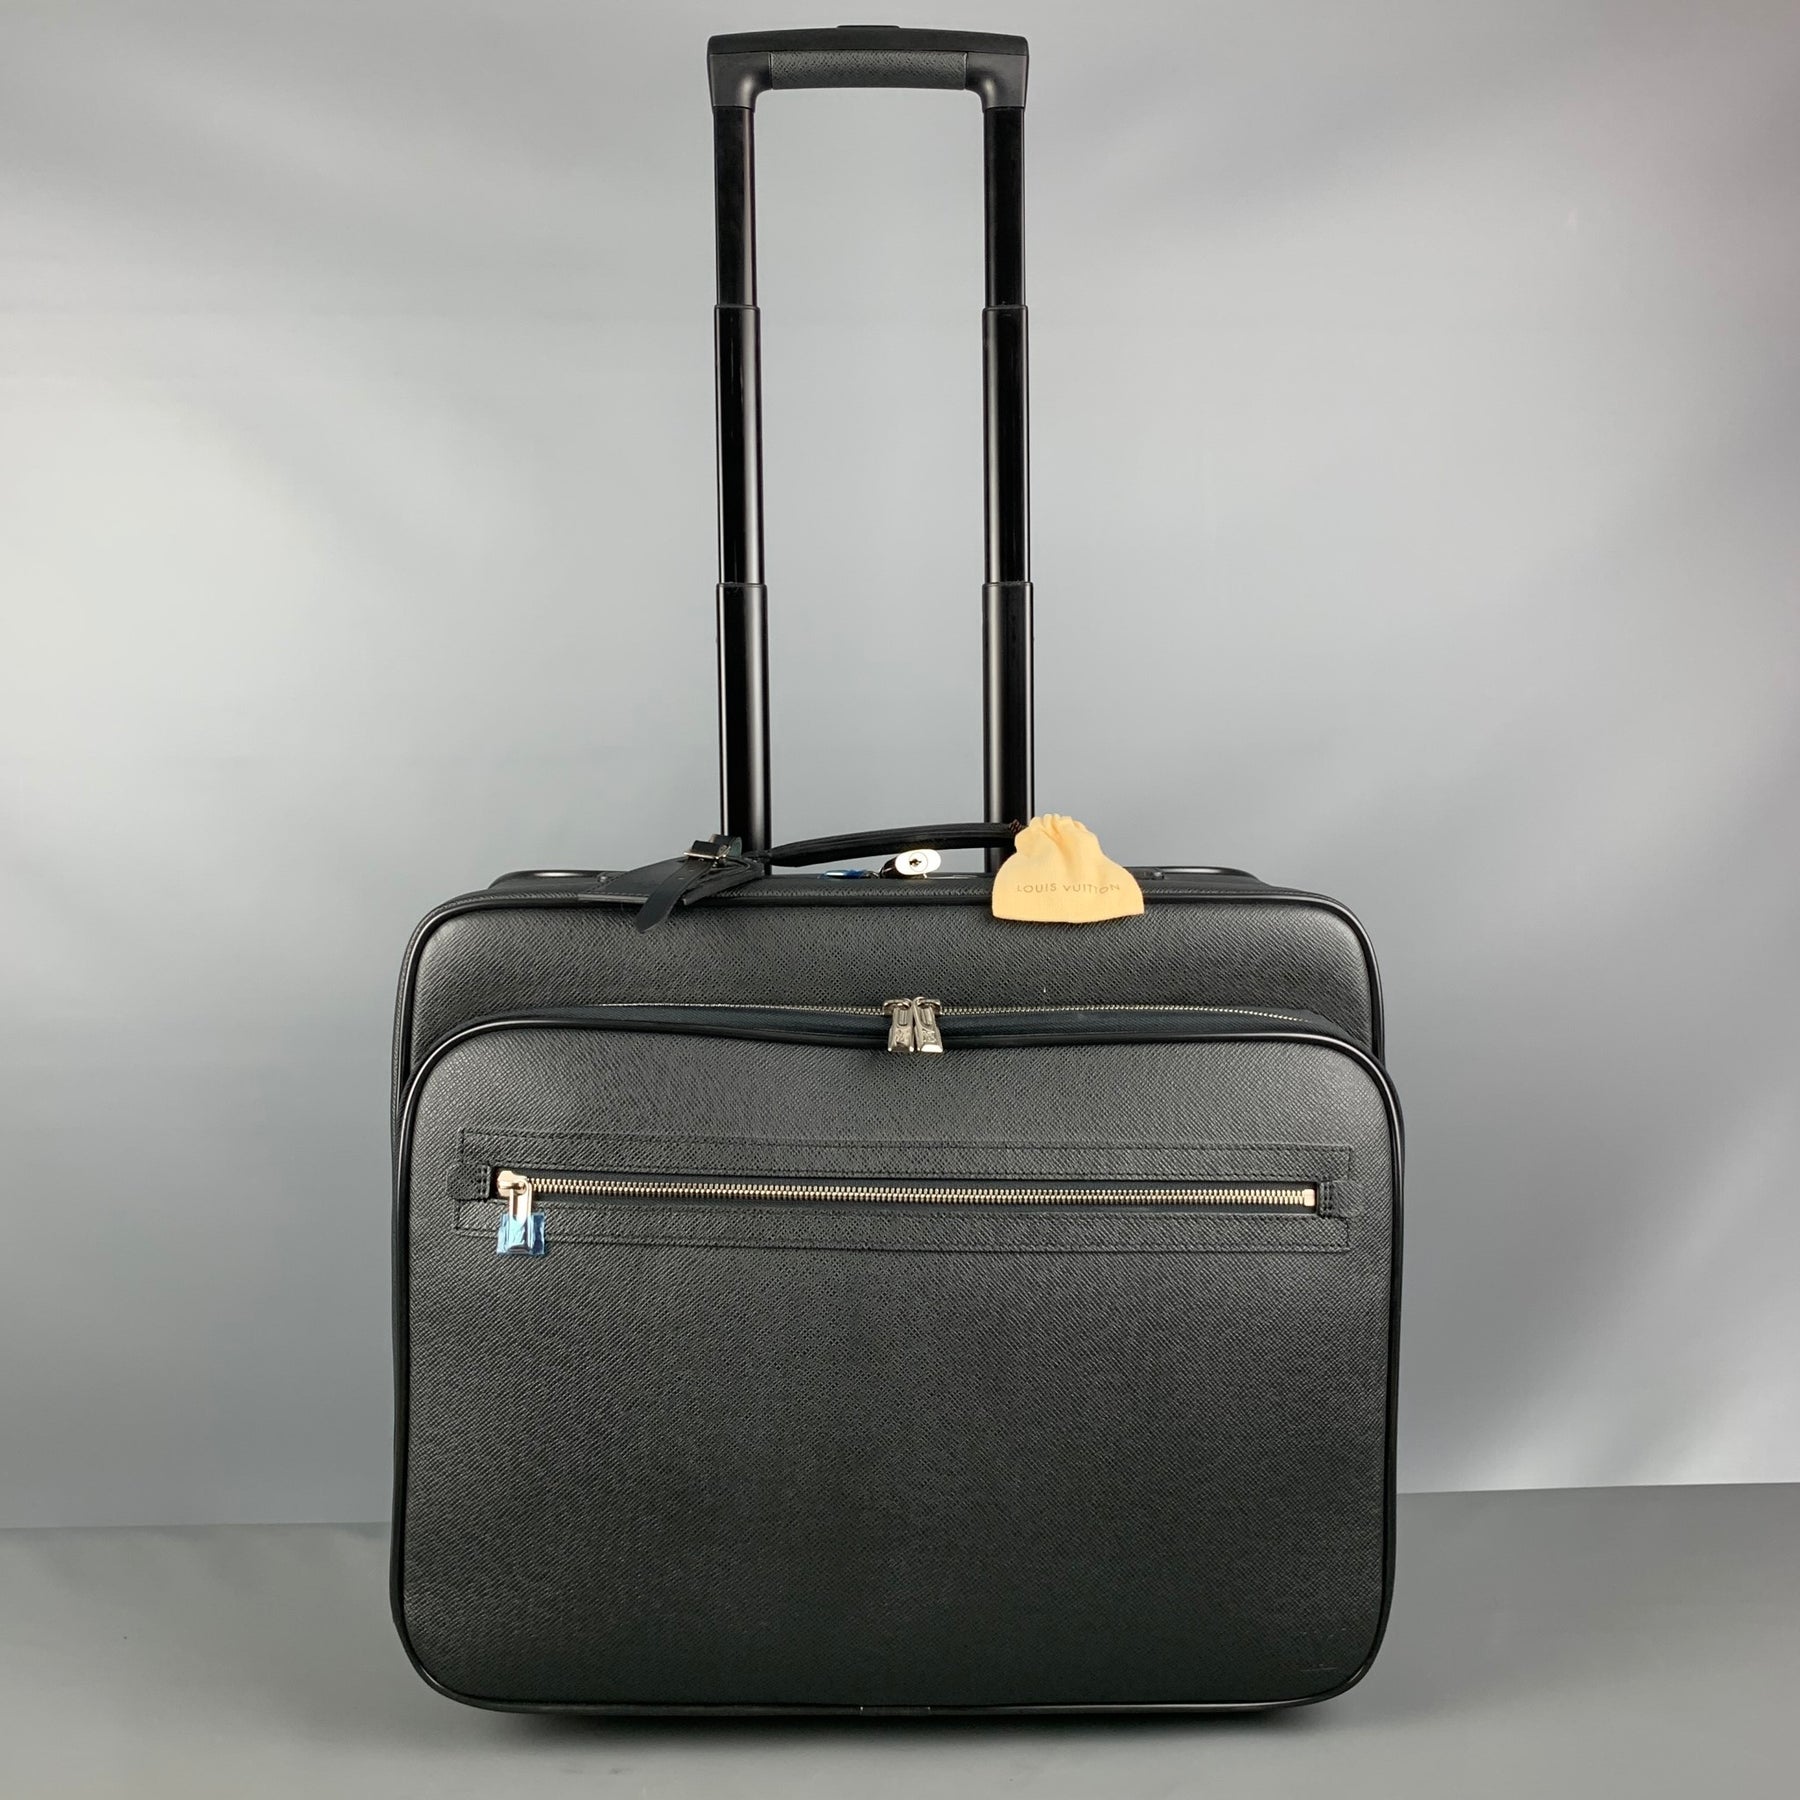 LOUIS VUITTON All Pilot Case Black Textured Leather Carry-On Roller Luggage  Bag